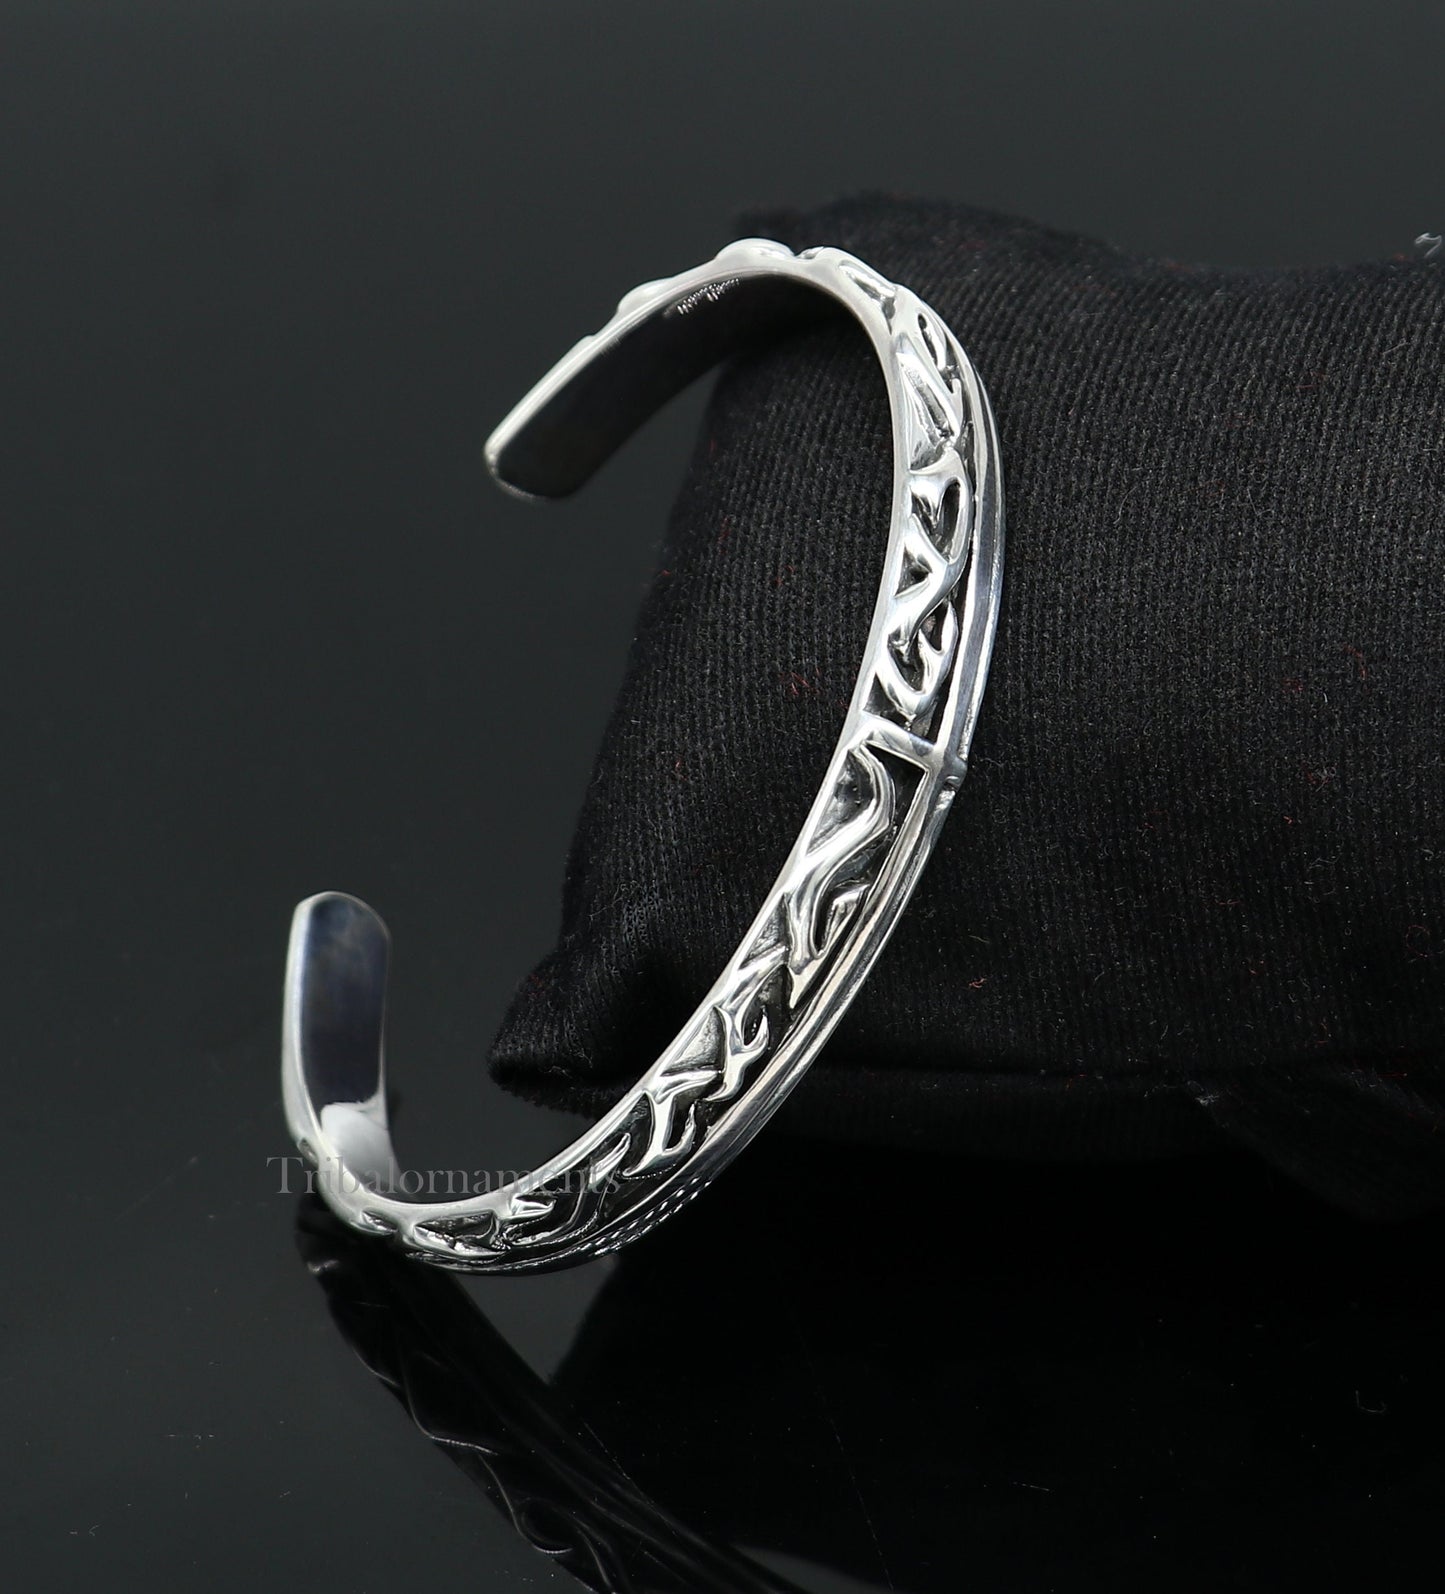 Vintage antique style 925 sterling silver handmade adjustable cuff bangle bracelet unsex gifting jewelry, solid cuff bracelet nsk372 - TRIBAL ORNAMENTS